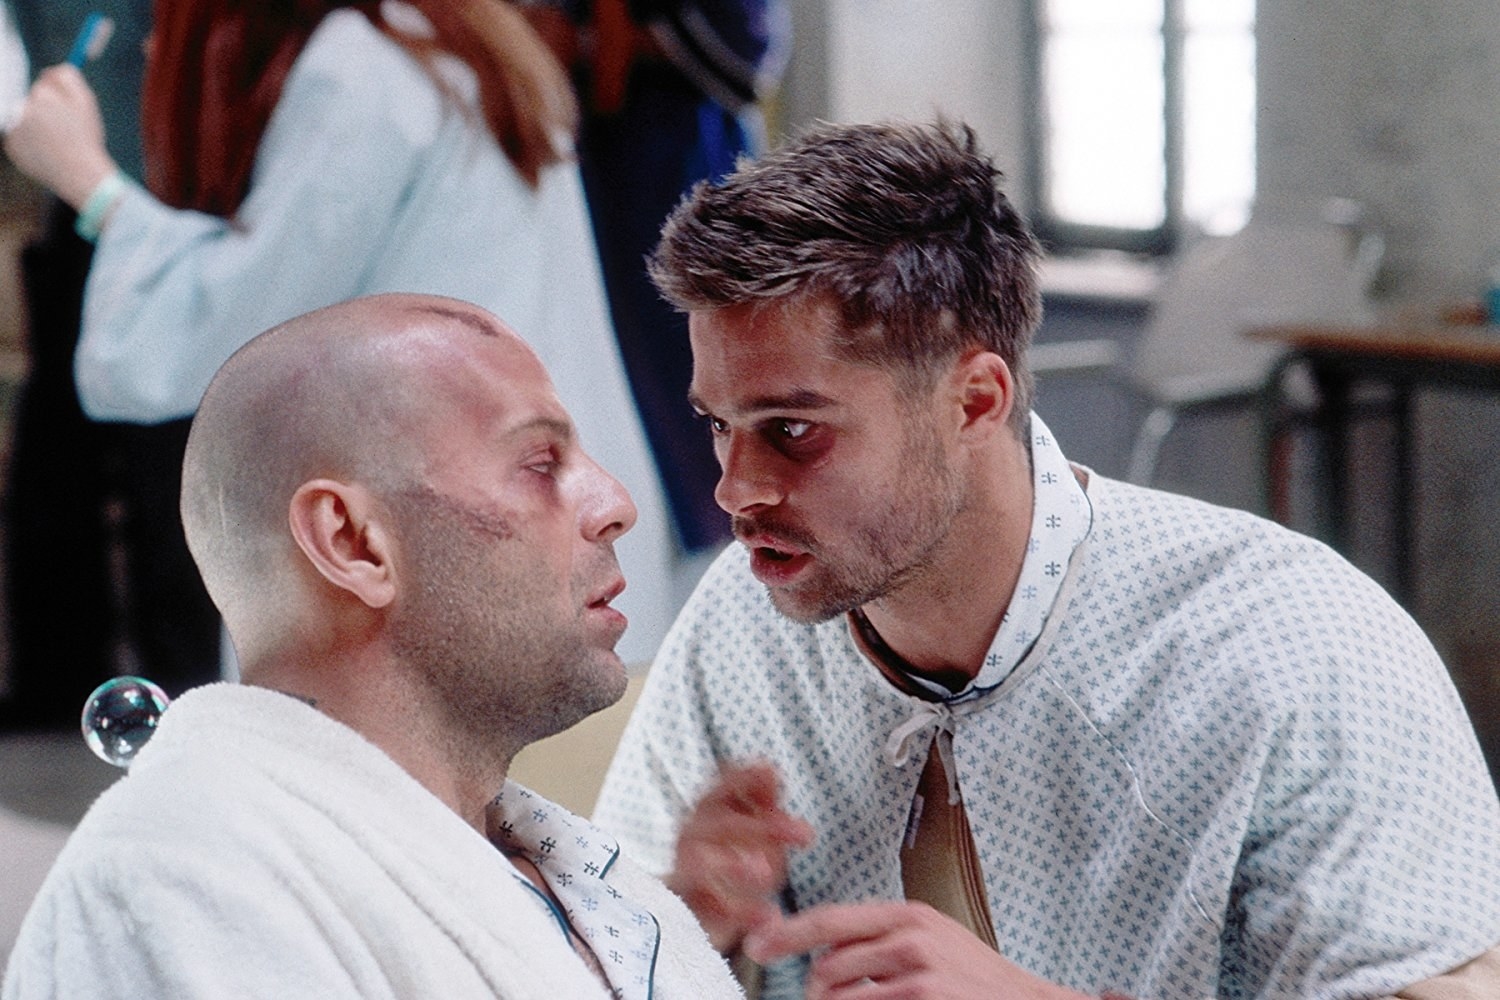 Bruce Willis as James Cole and Brad Pitt as Jeffrey Goines intensely looking at each other in an asylum